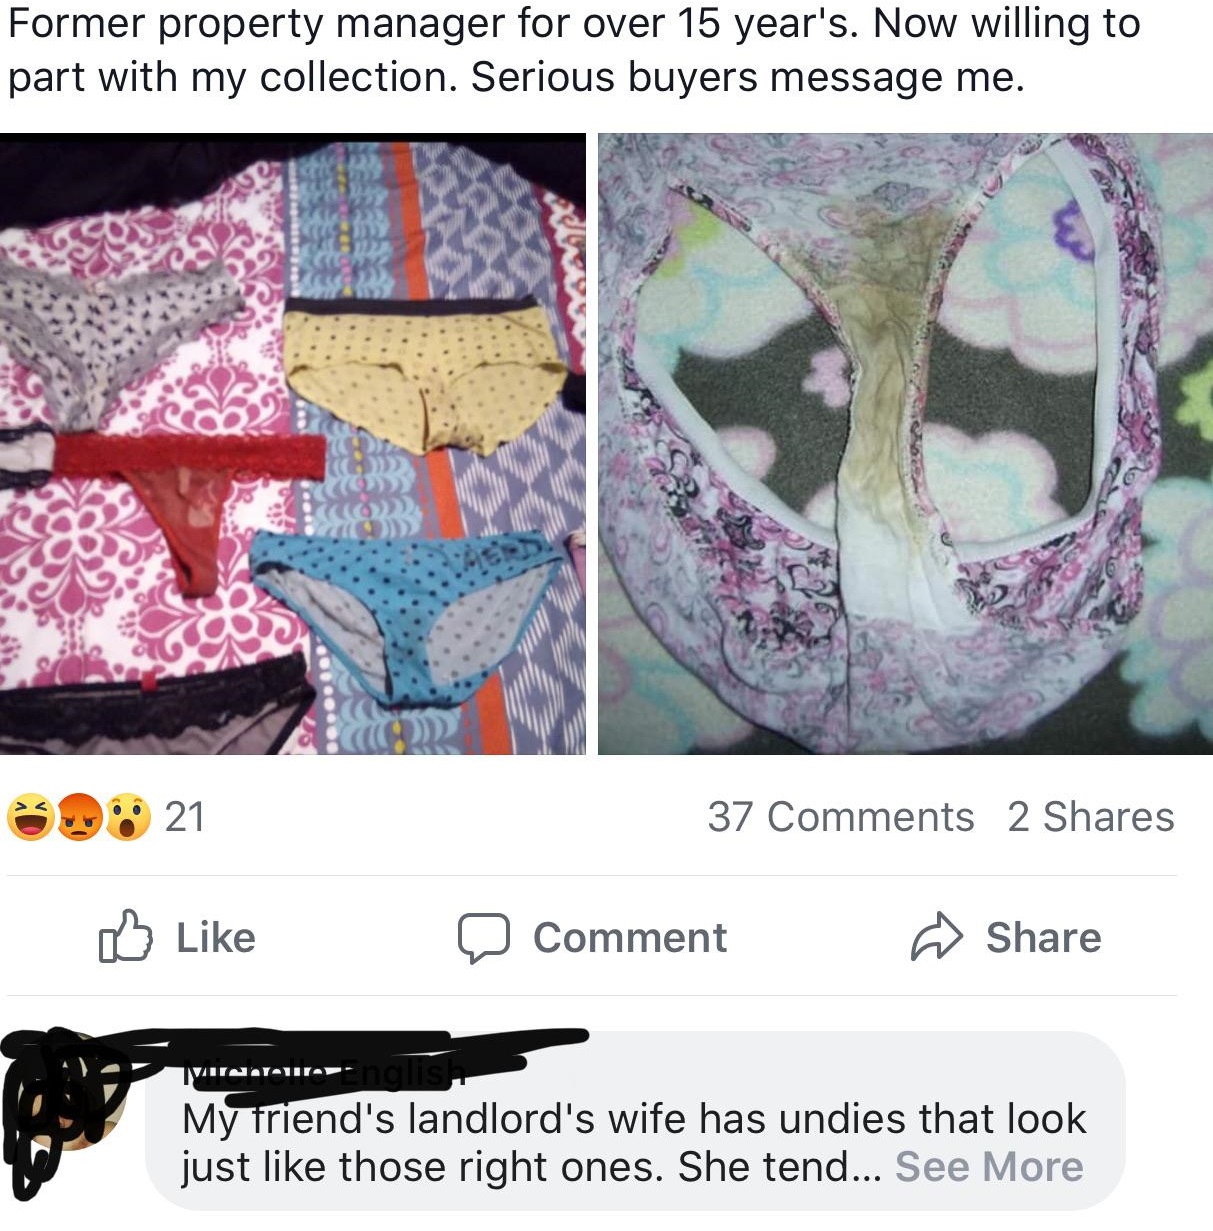 pattern - Former property manager for over 15 year's. Now willing to part with my collection. Serious buyers message me. 21 37 2 0 o Comment Via My friend's landlord's wife has undies that look just those right ones. She tend... See More